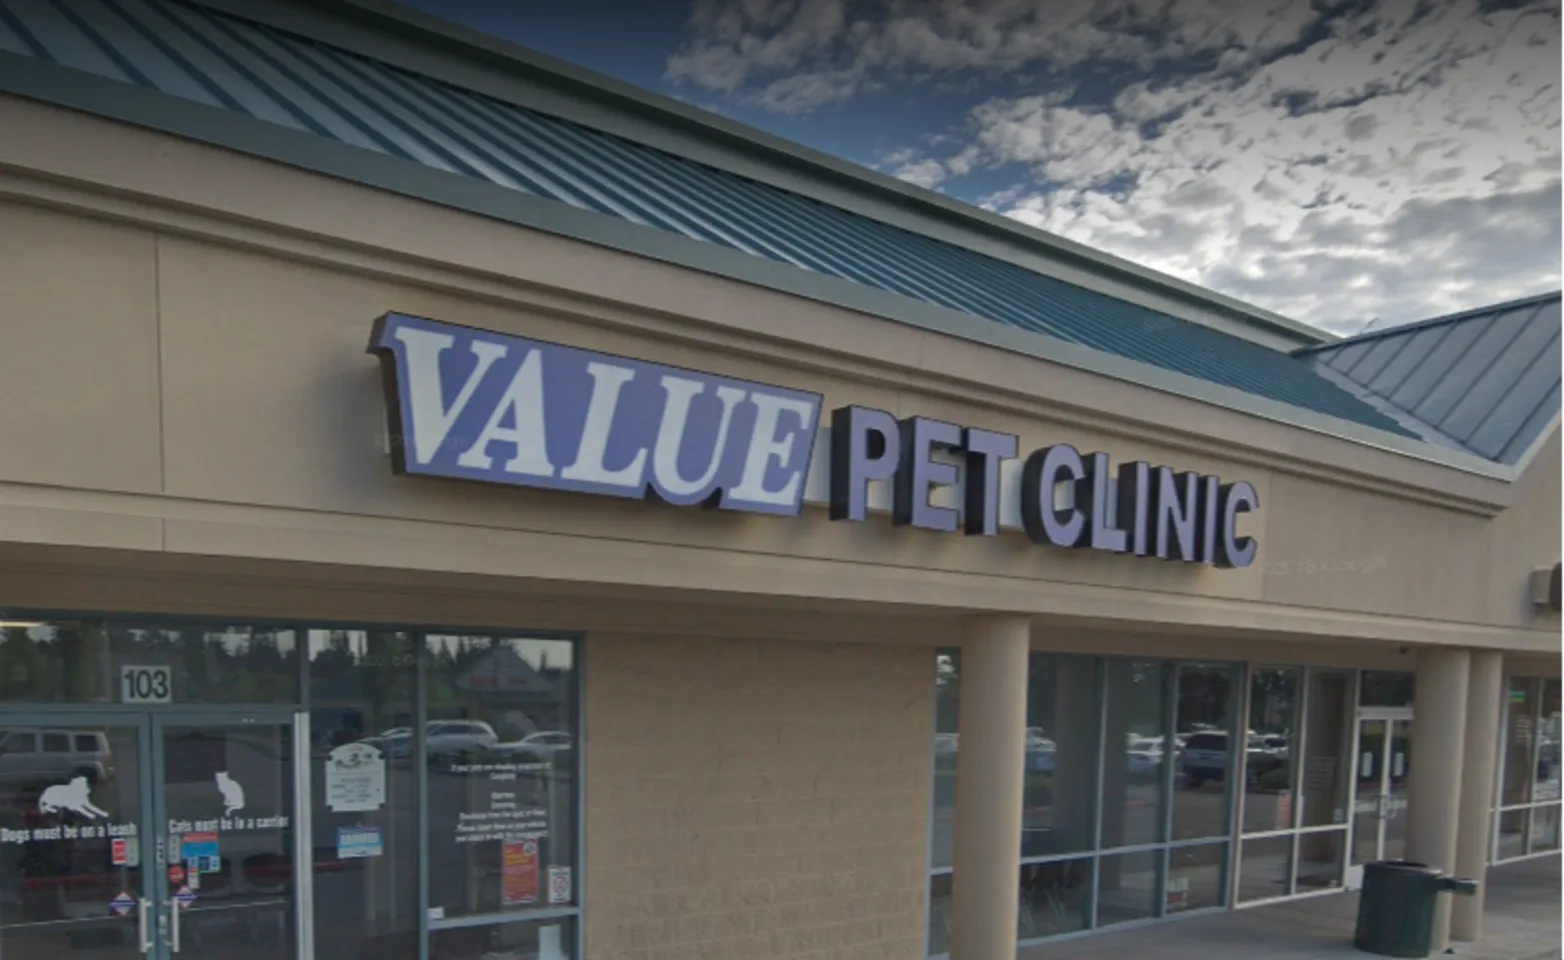 Photo of the front of the building of Value Pet Clinic - Renton displaying the sign "Value Pet Clinic"